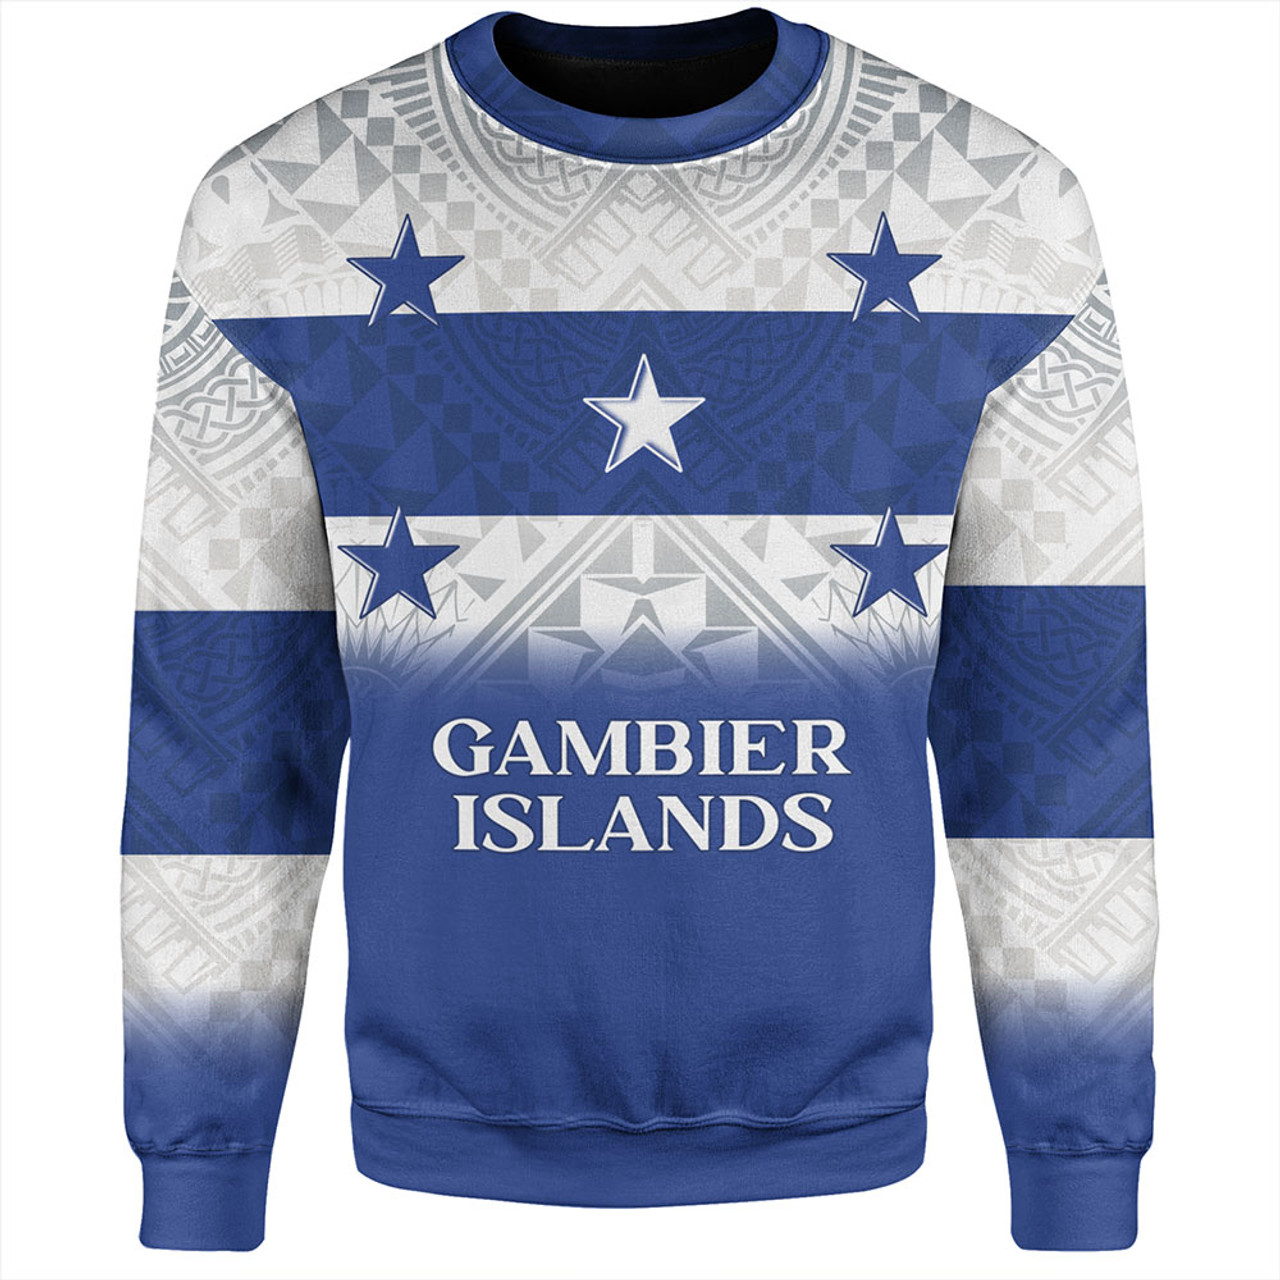 Gambier Islands Sweatshirt Flag Color With Traditional Patterns